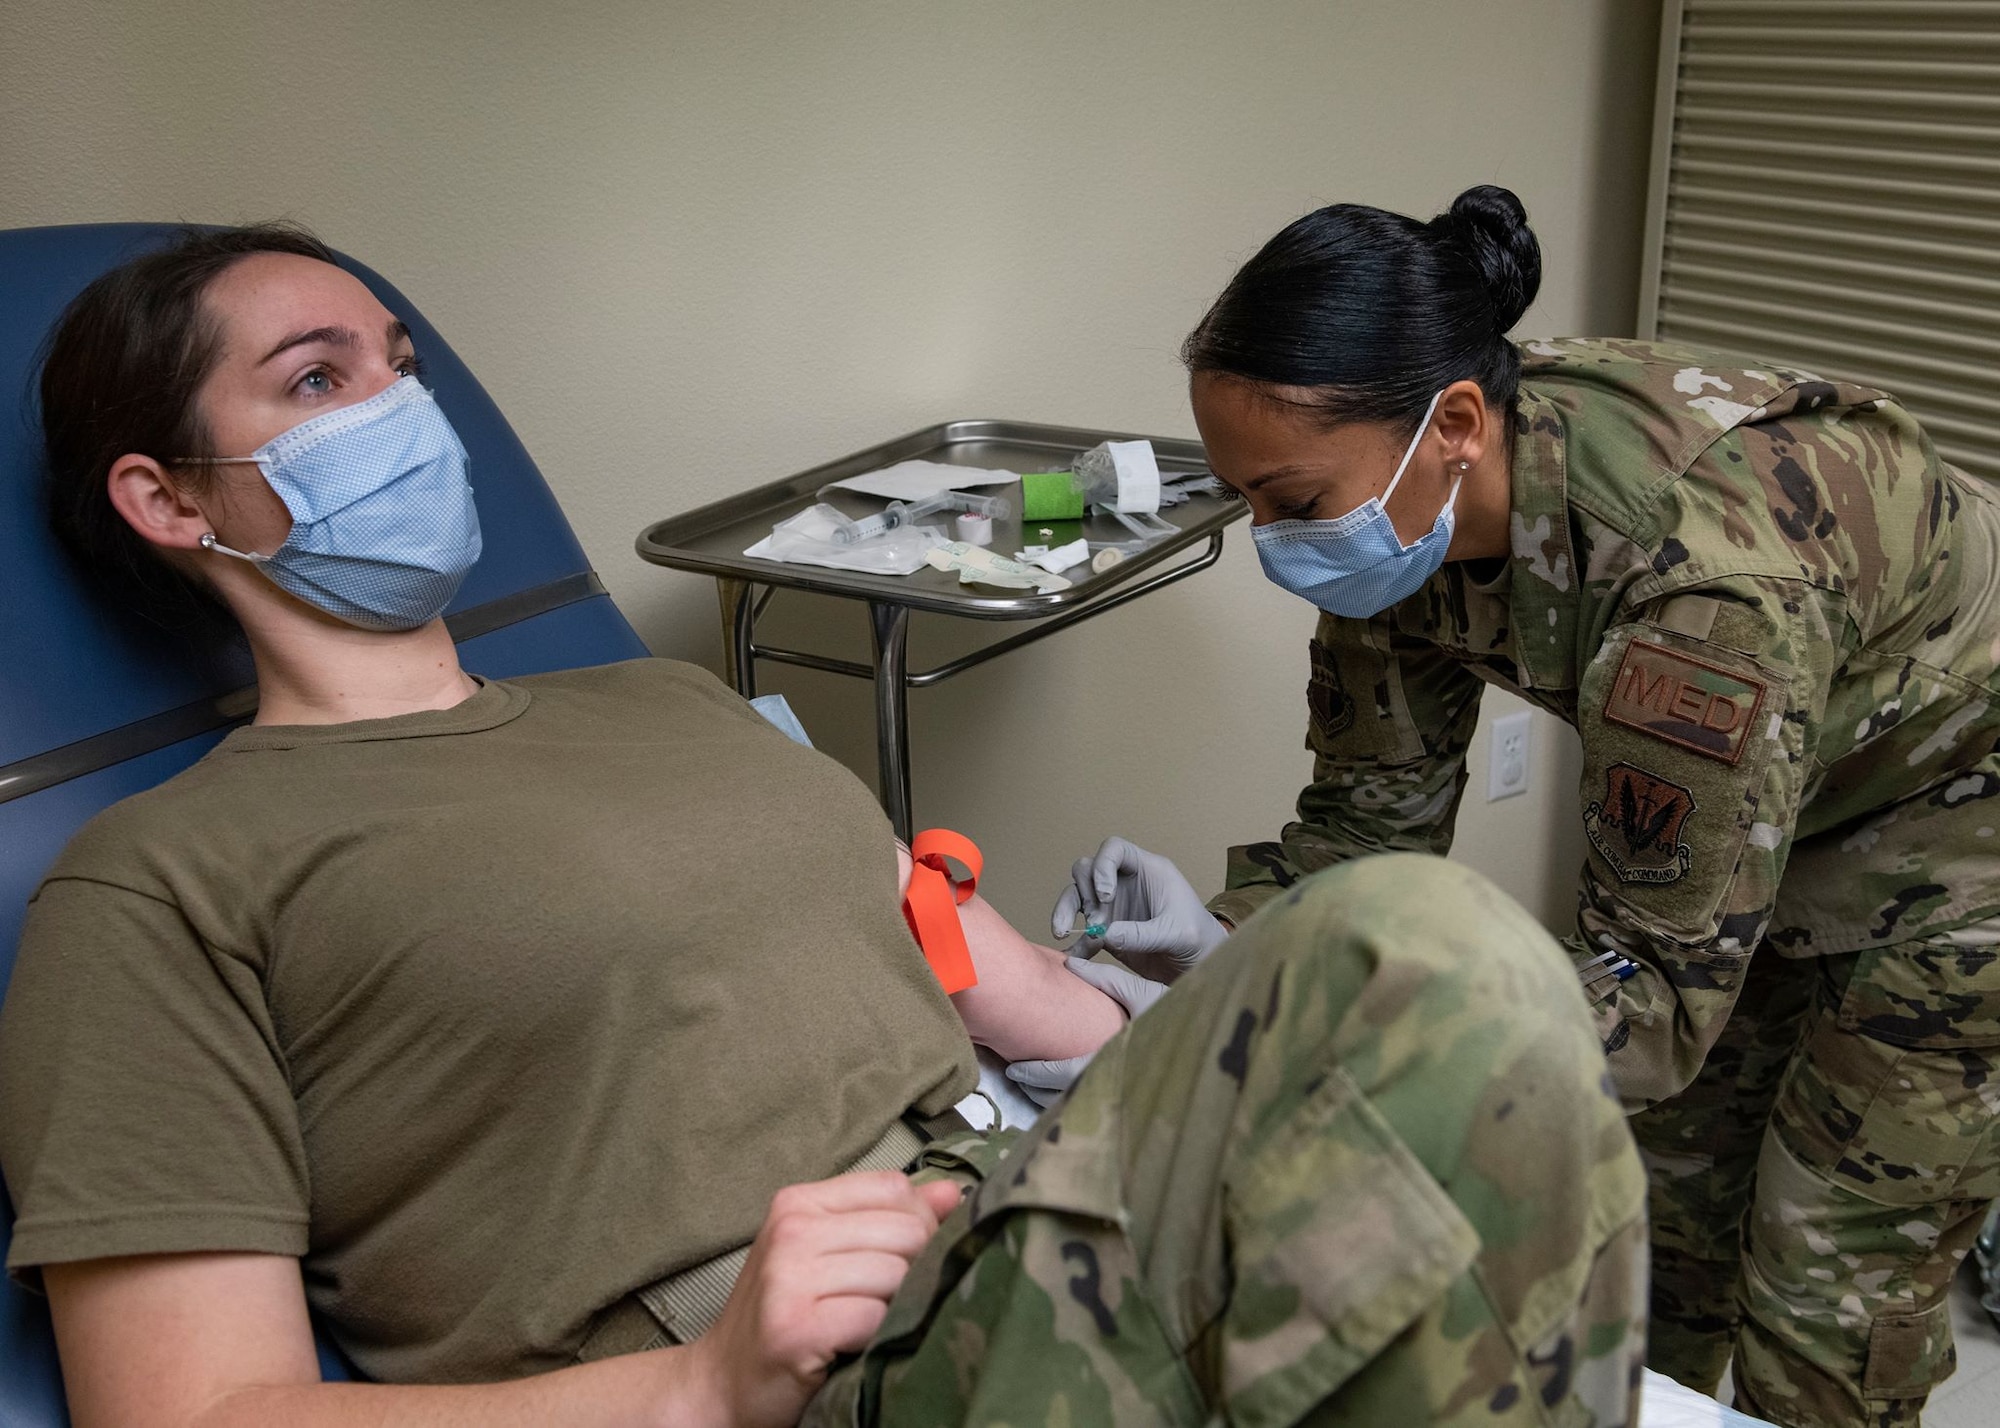 U.S. Air Force Tech. Sgt. Ulla Strömberg, 9th Health Care Operations Squadron Family Care Flight section chief, right, prepares an intravenous access for Staff Sgt. Marissa Smyth, 9th HCOS Family Health Clinic NCOIC, at Beale Air Force Base, California, May 1, 2020. Strömberg was demonstrating the proper procedures for training purposes. (U.S. Air Force photo by Airman Jason W. Cochran)